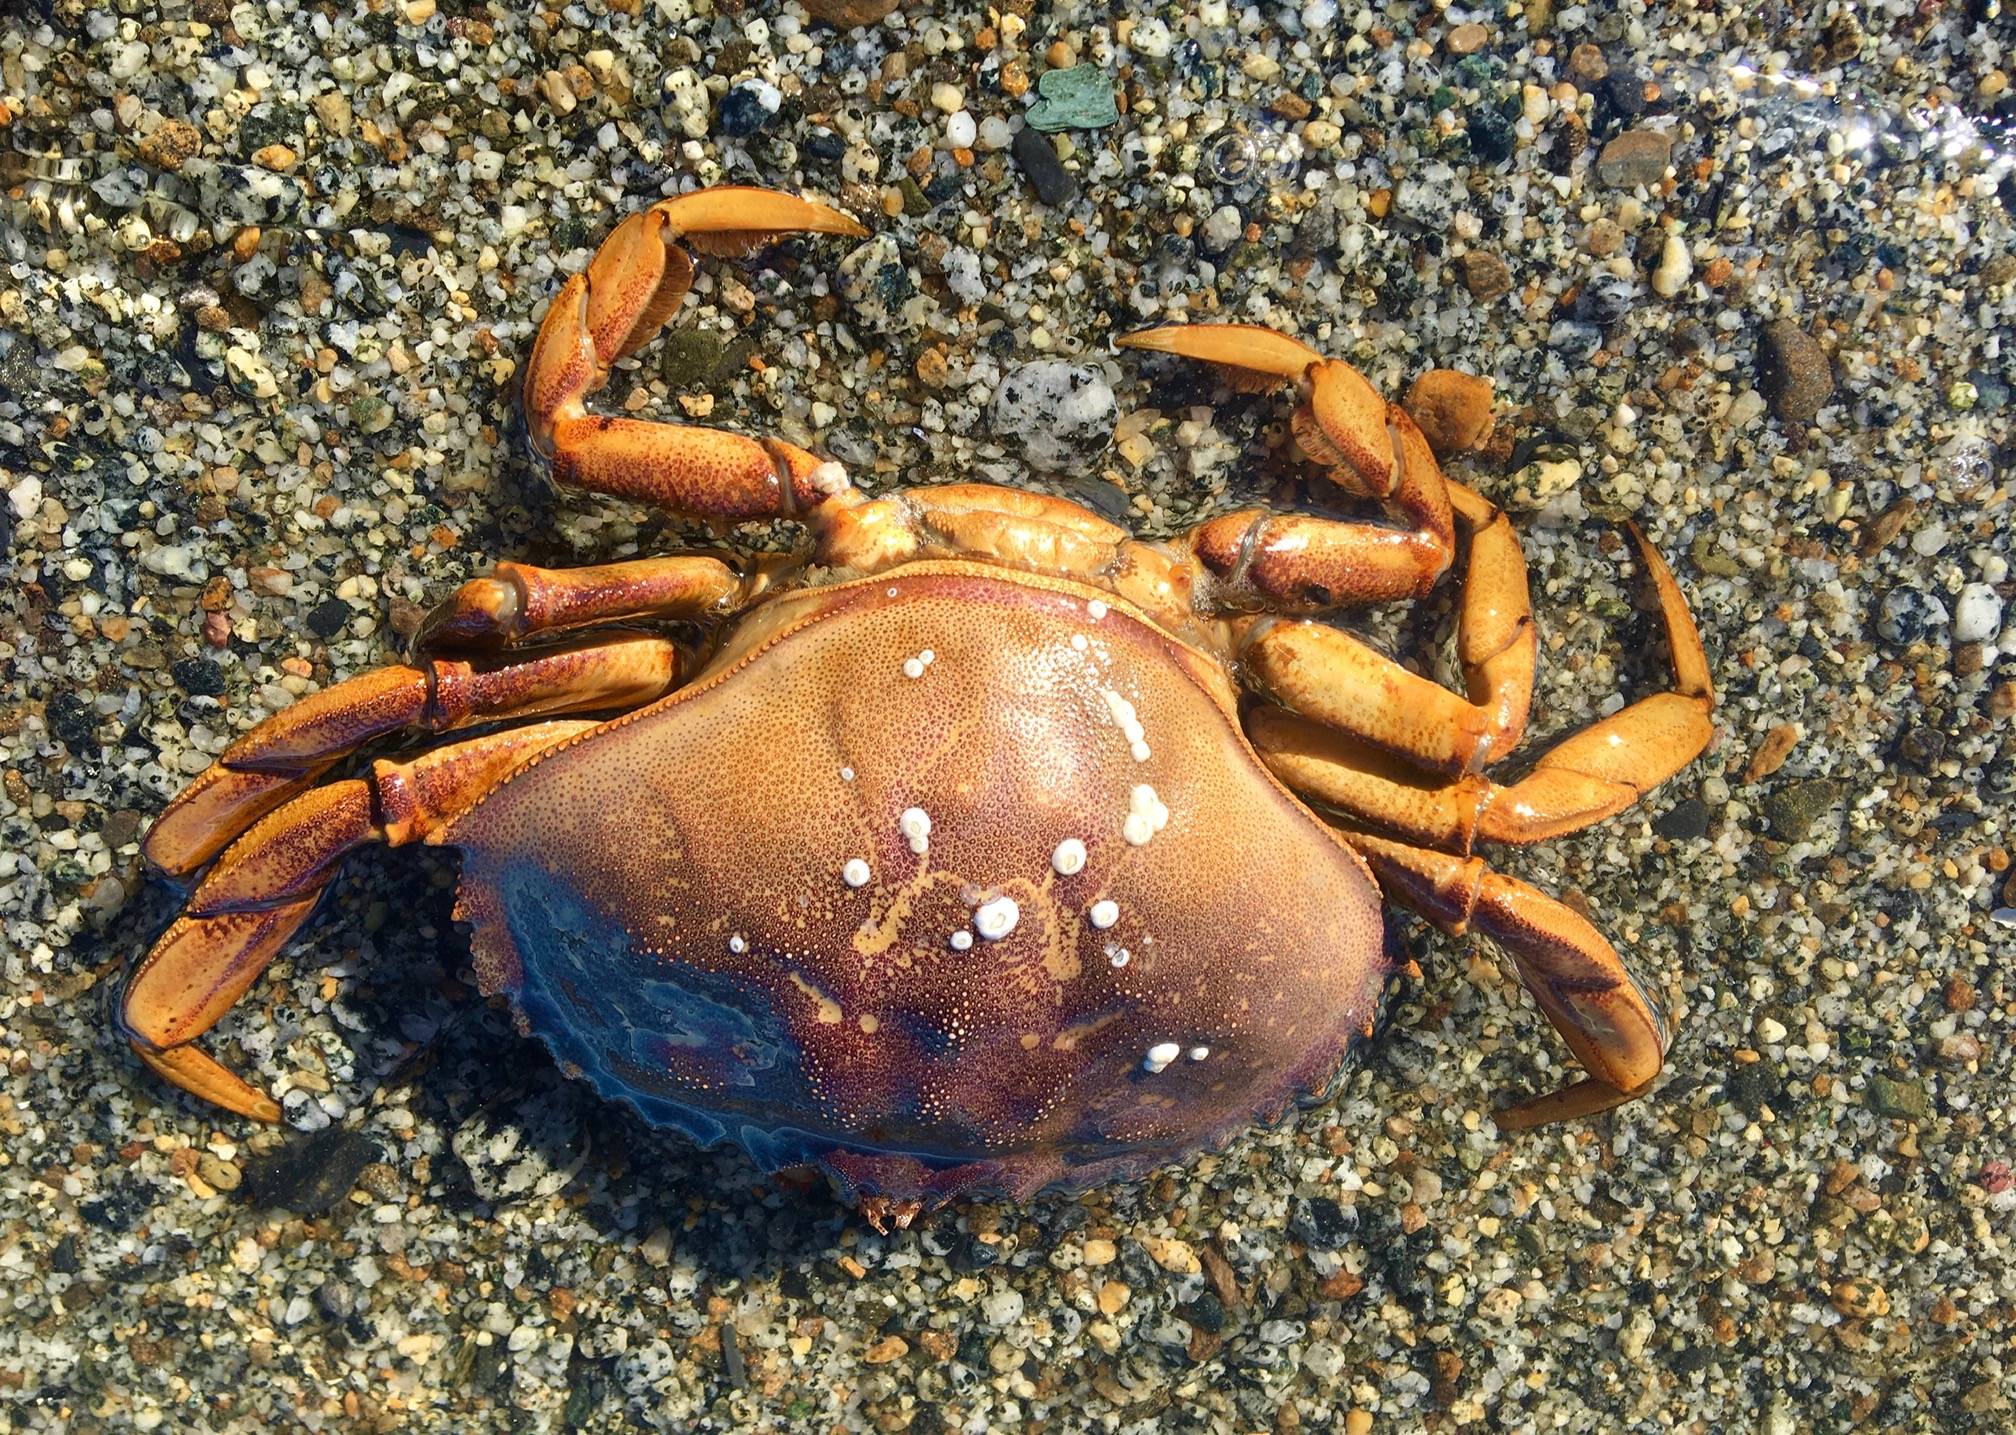 A Dungeness crab wades in the shallow waters of Boy Scout Beach on April 18, 2020. (Courtesy Photo | Denise Carroll)